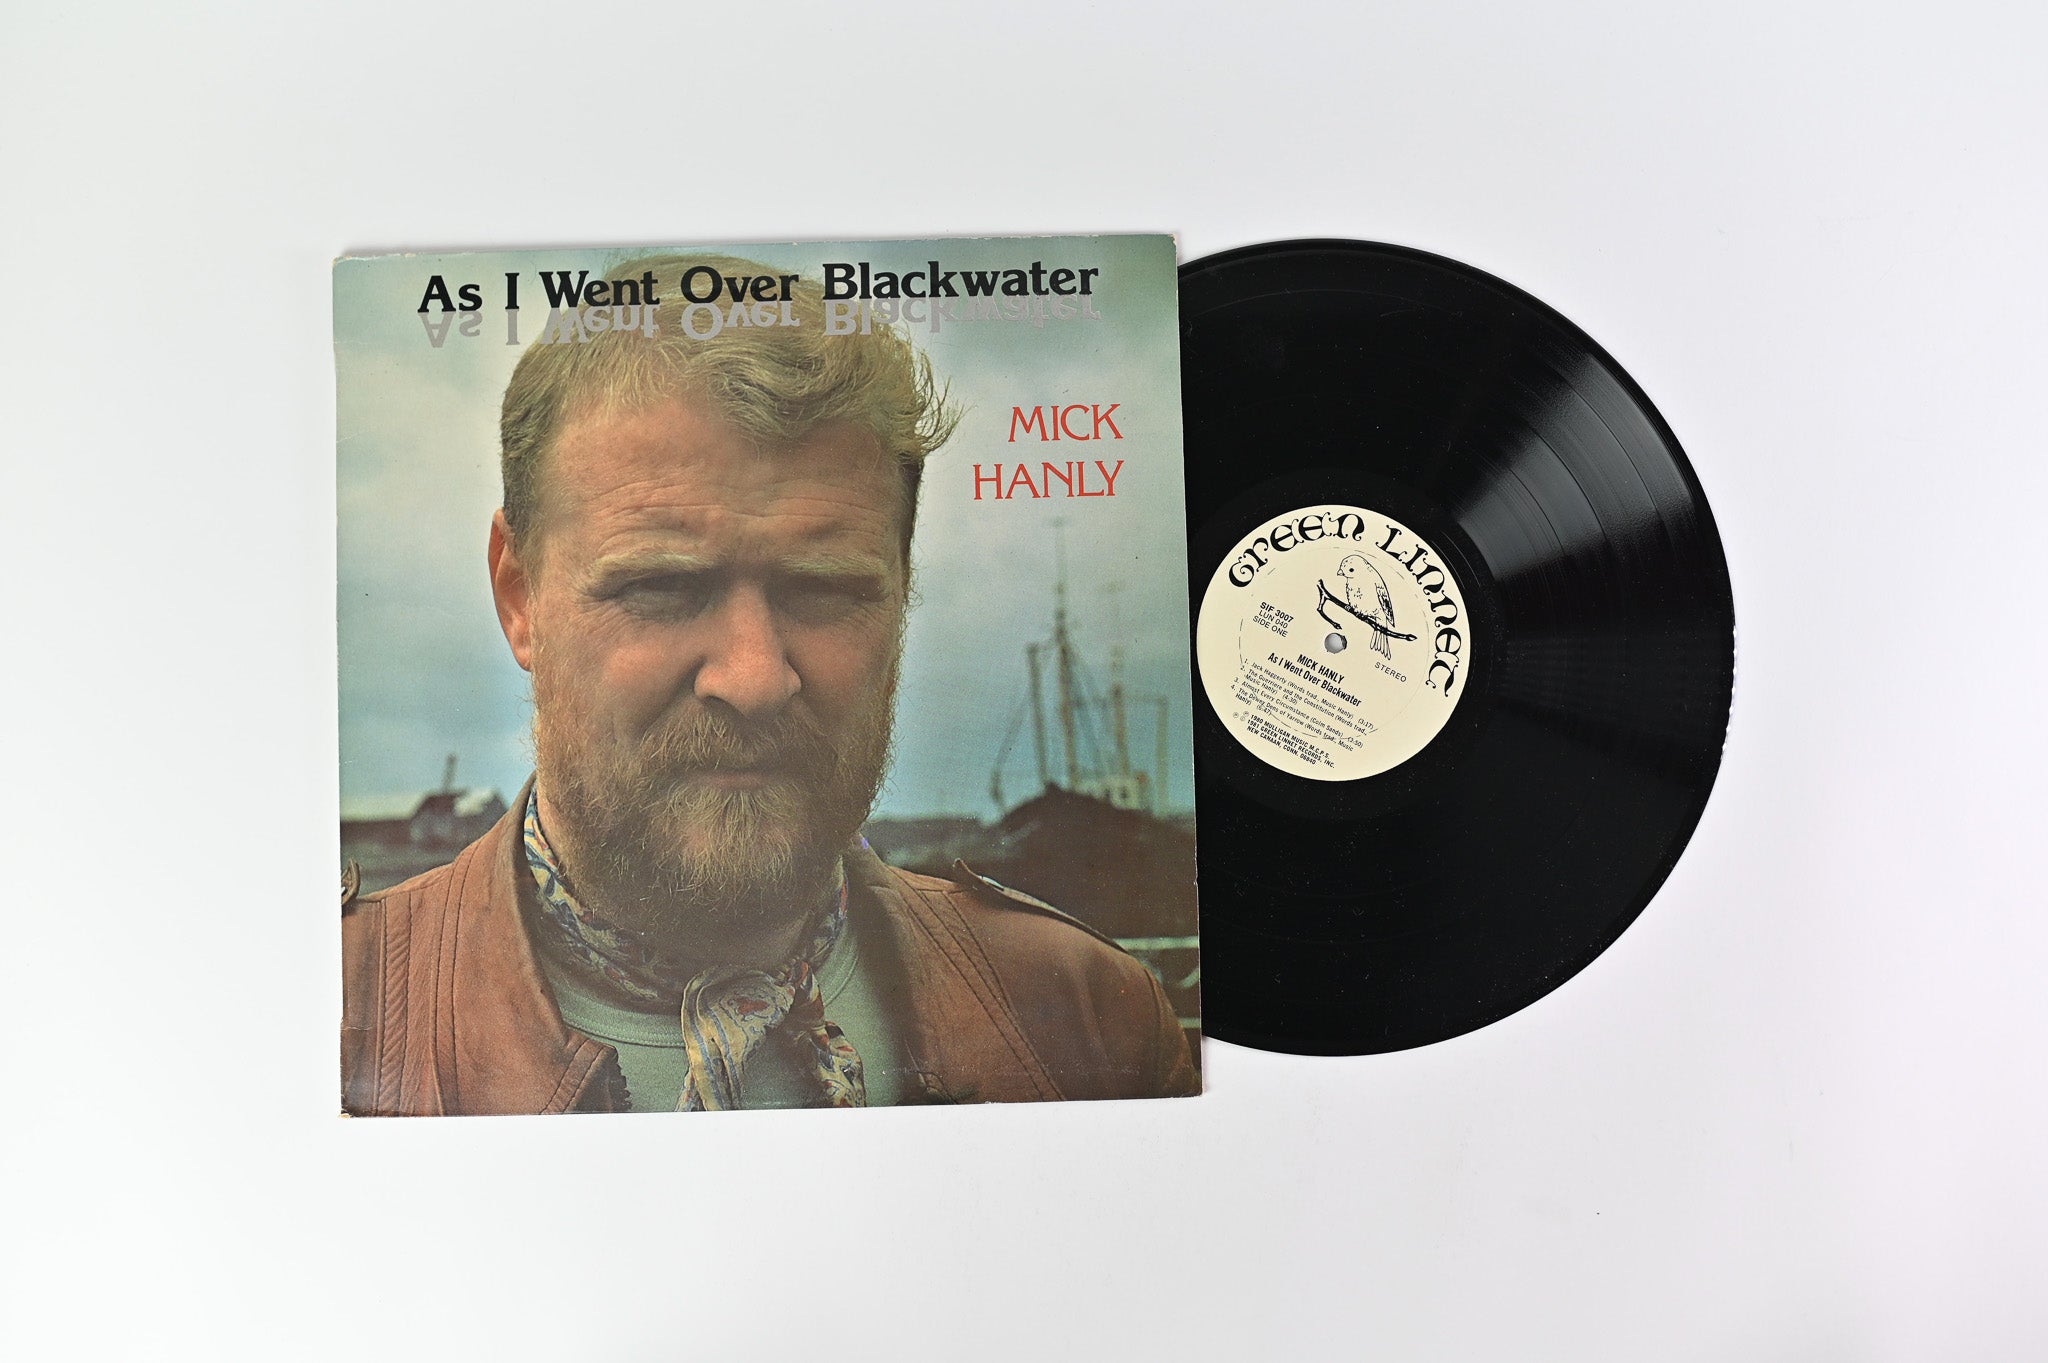 Mick Hanly - As I Went Over Blackwater on Green Linnet